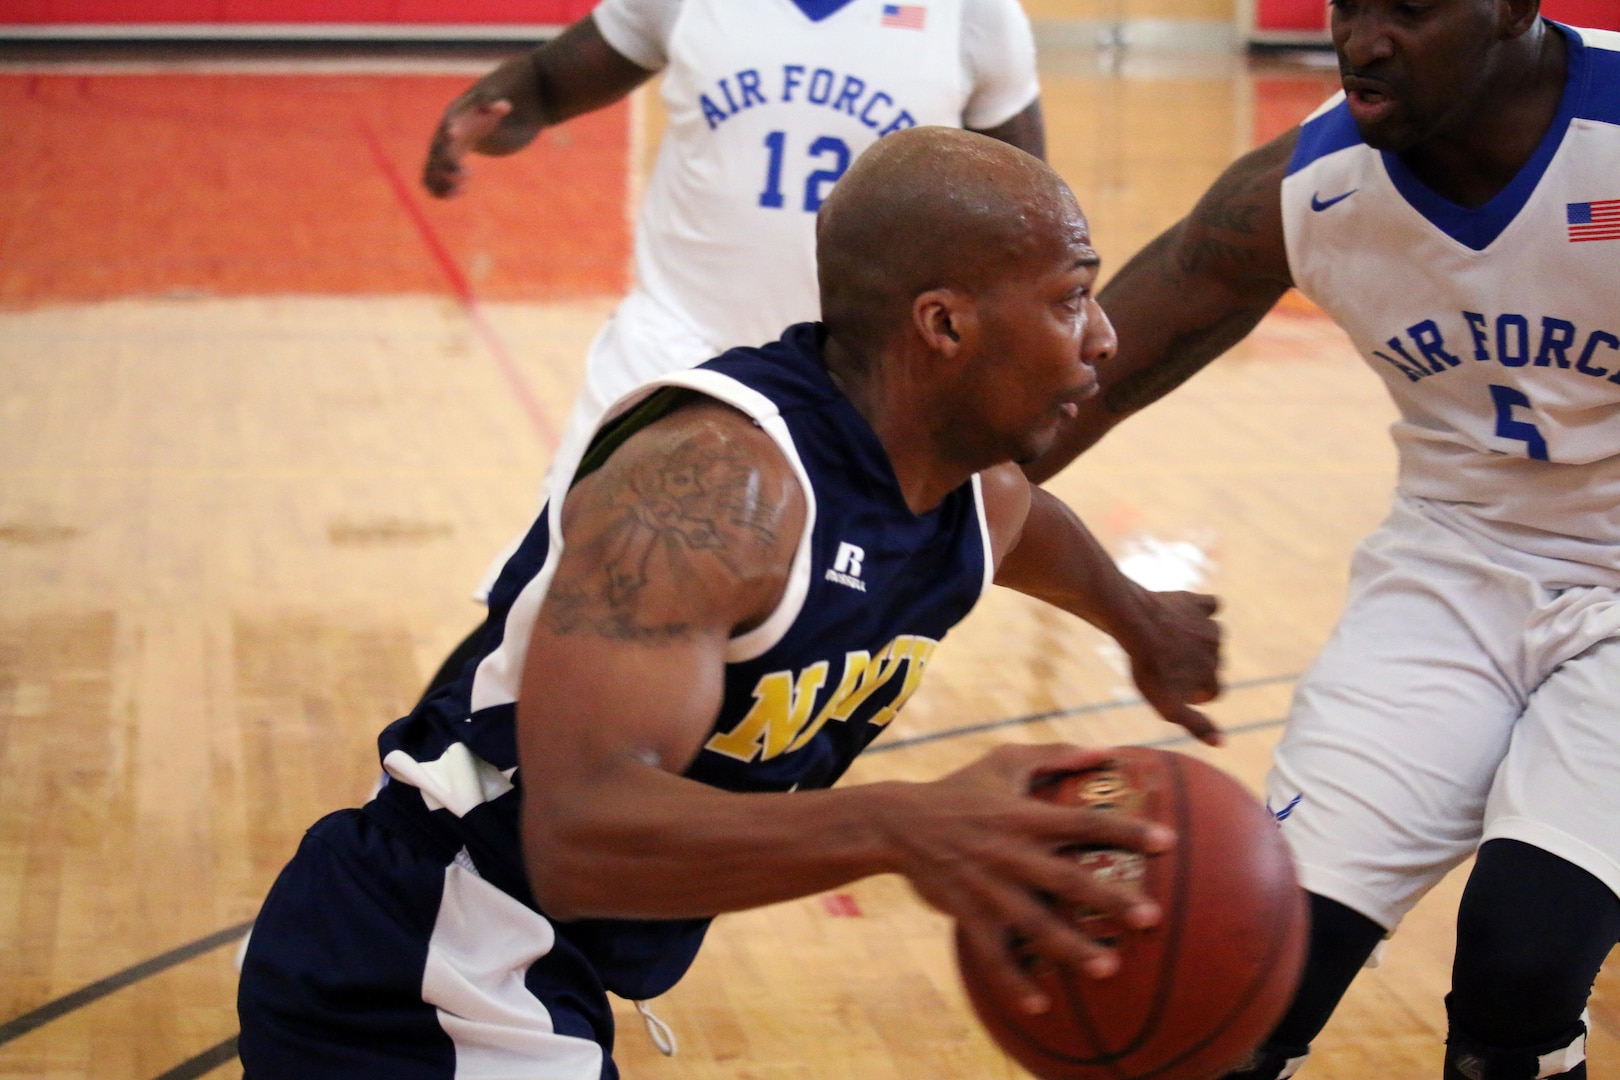 All-Navy's Derrick Sumpter of the U.S. Coast Guard scores 26 against Air Force, but Air Force holds on to the lead to win 79-72.  The 2016 Armed Forces Men's Basketball Championship held at MCB Quantico, Va. from 1-7 November.  The best two teams during the doubel round robin will face each other for the 2016 Armed Forces crown.  